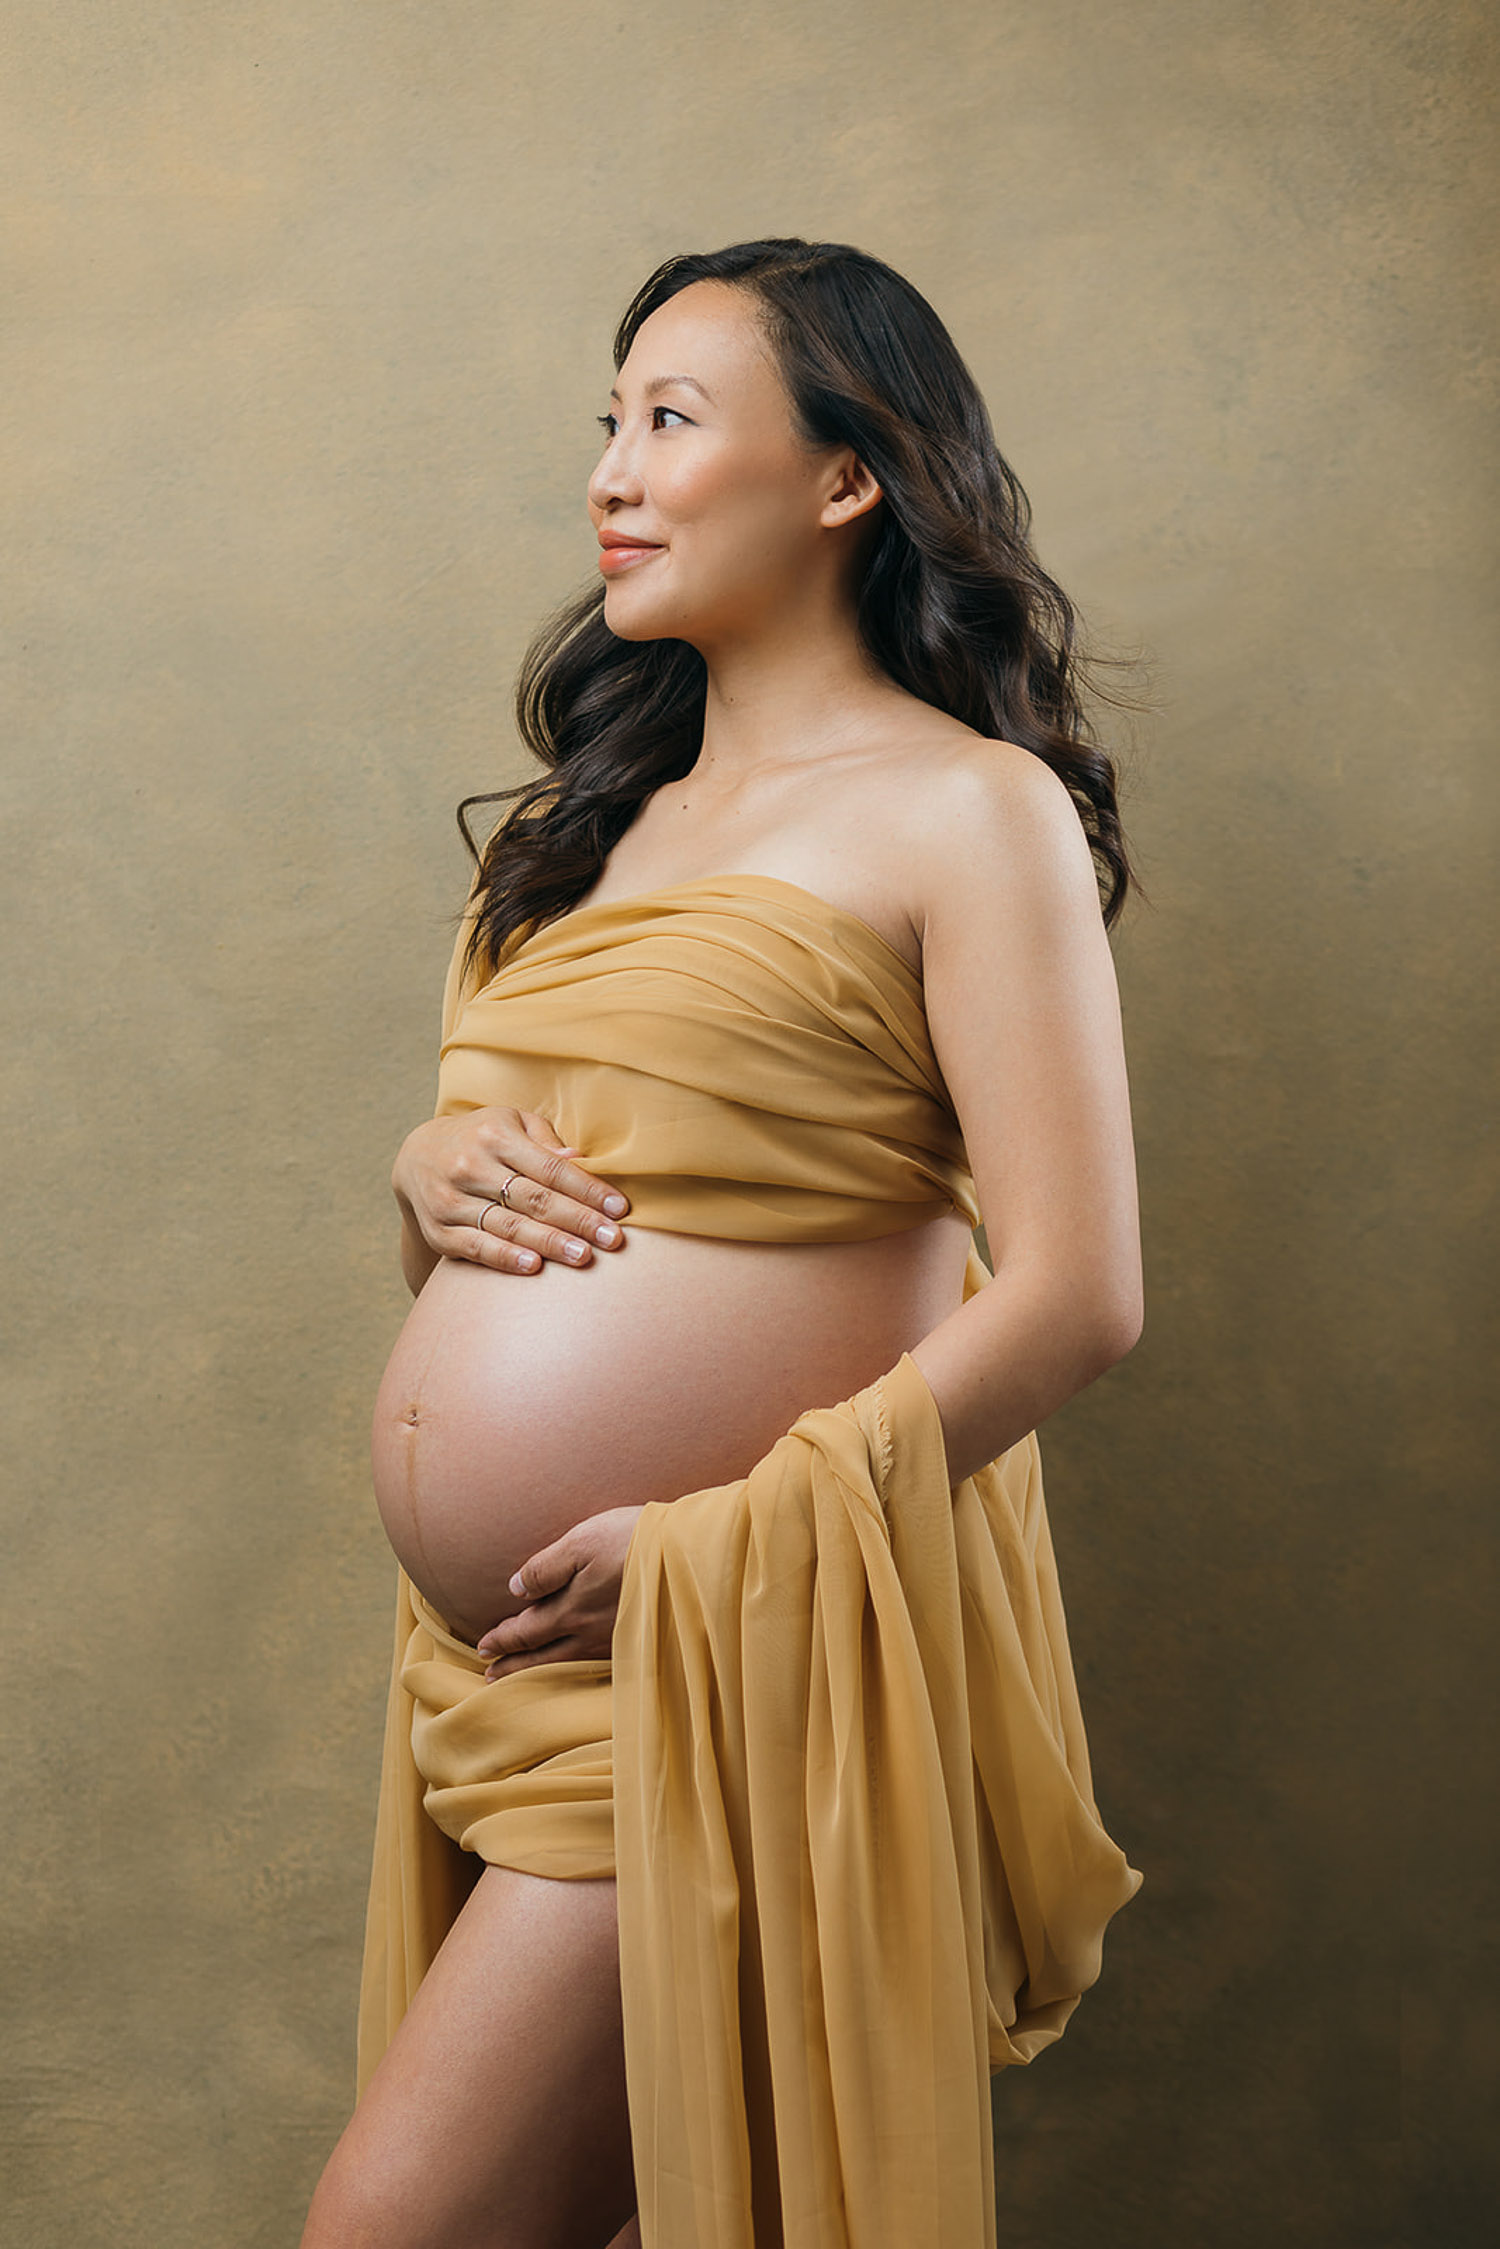 Editorial maternity photography